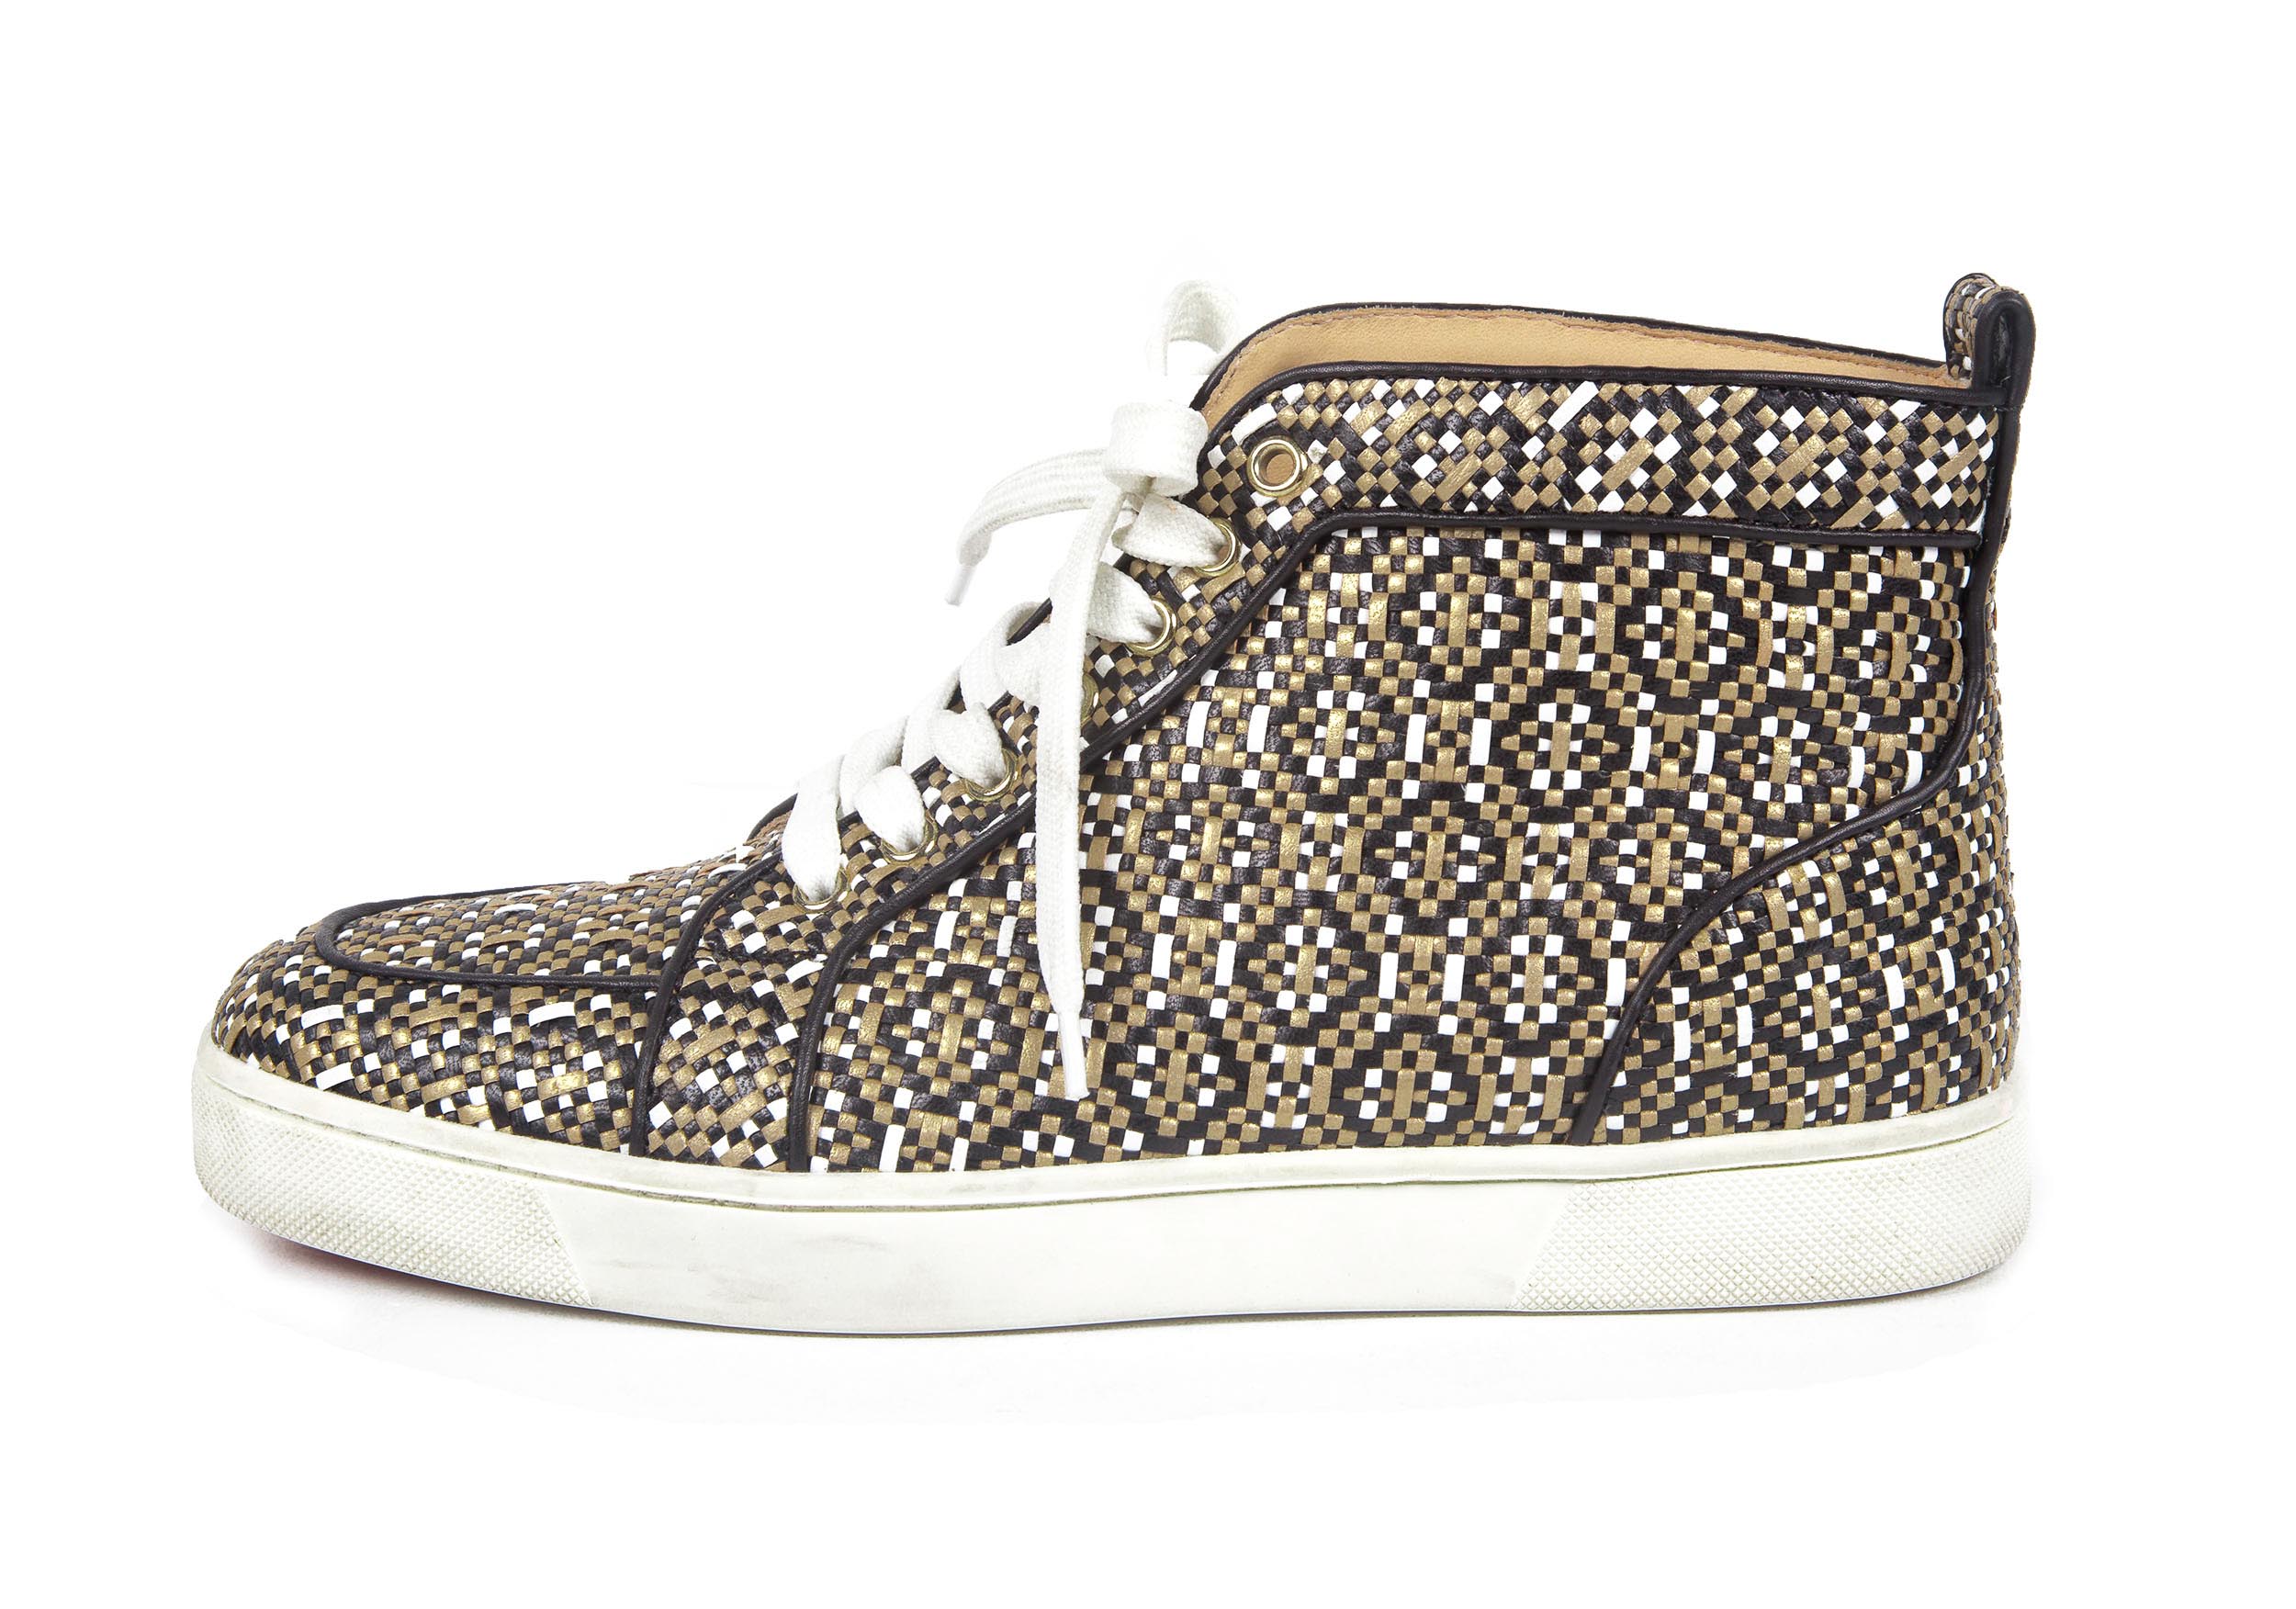 Christian Louboutin Rantus Orlato Sneakers 41.5 | To Be Continued ...